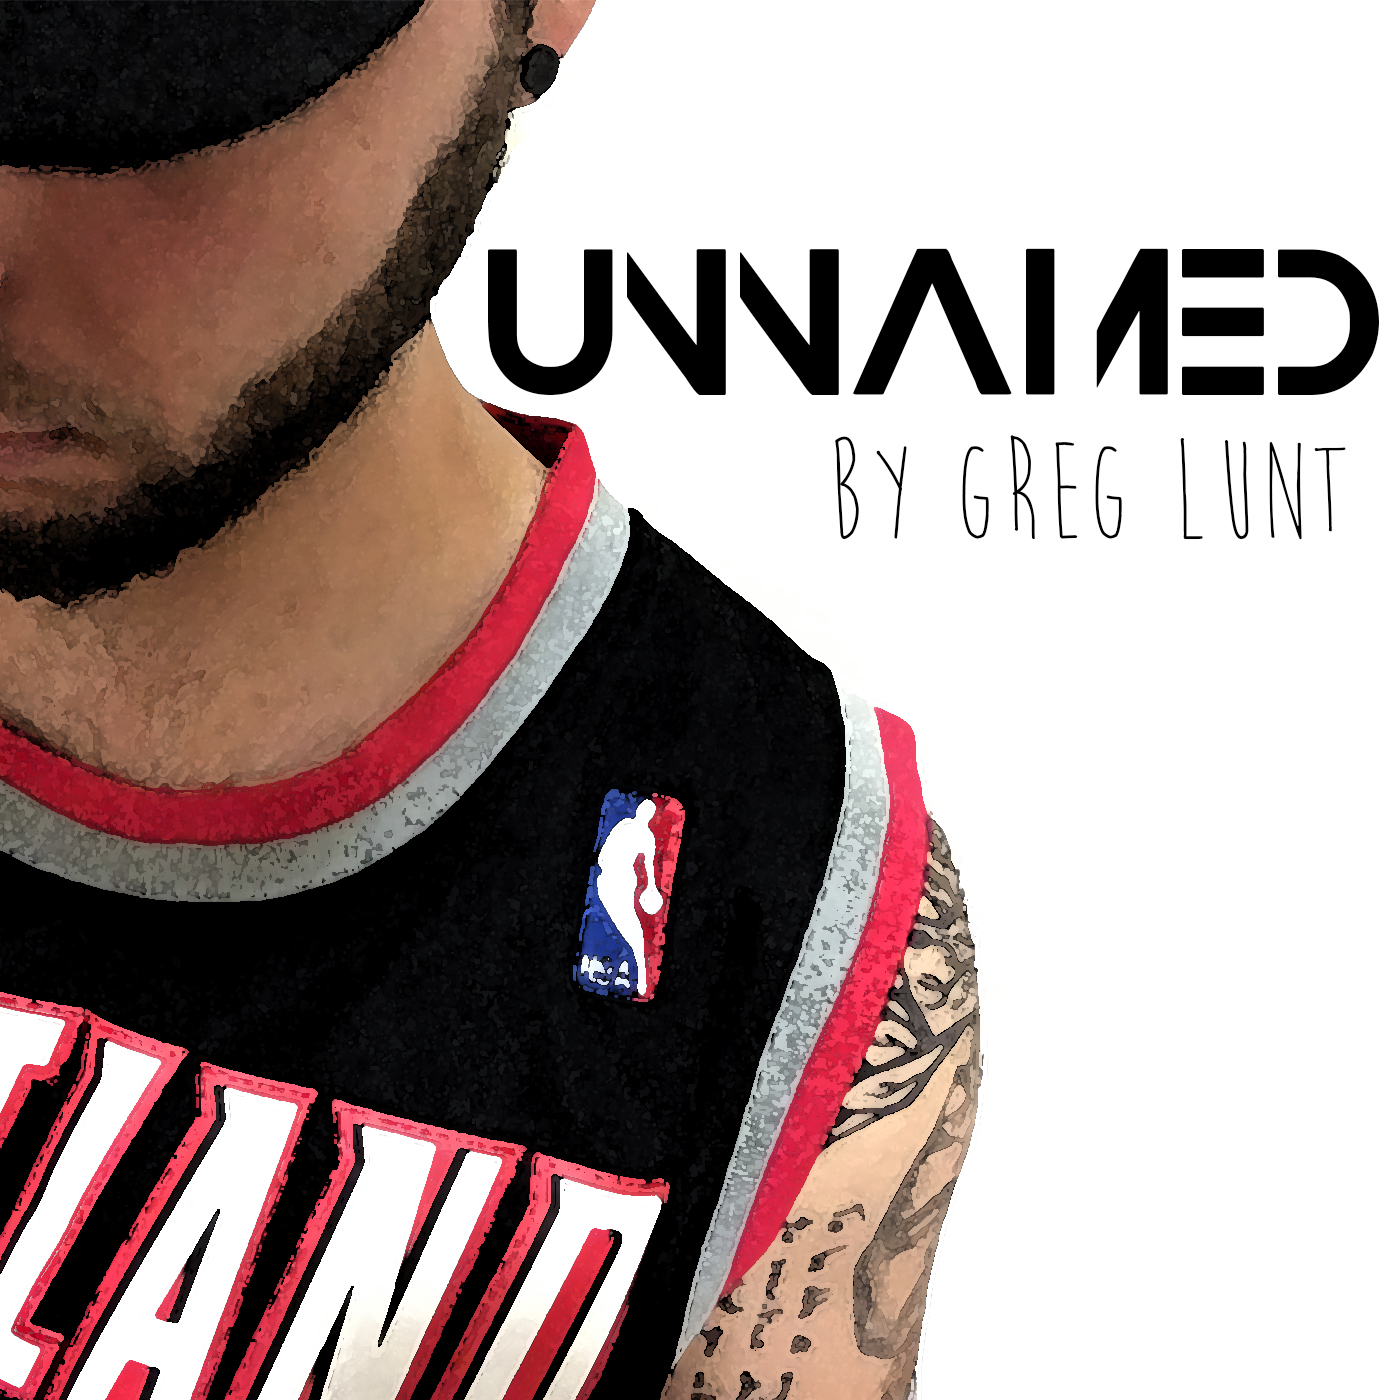 UNNAMED by Greg Lunt